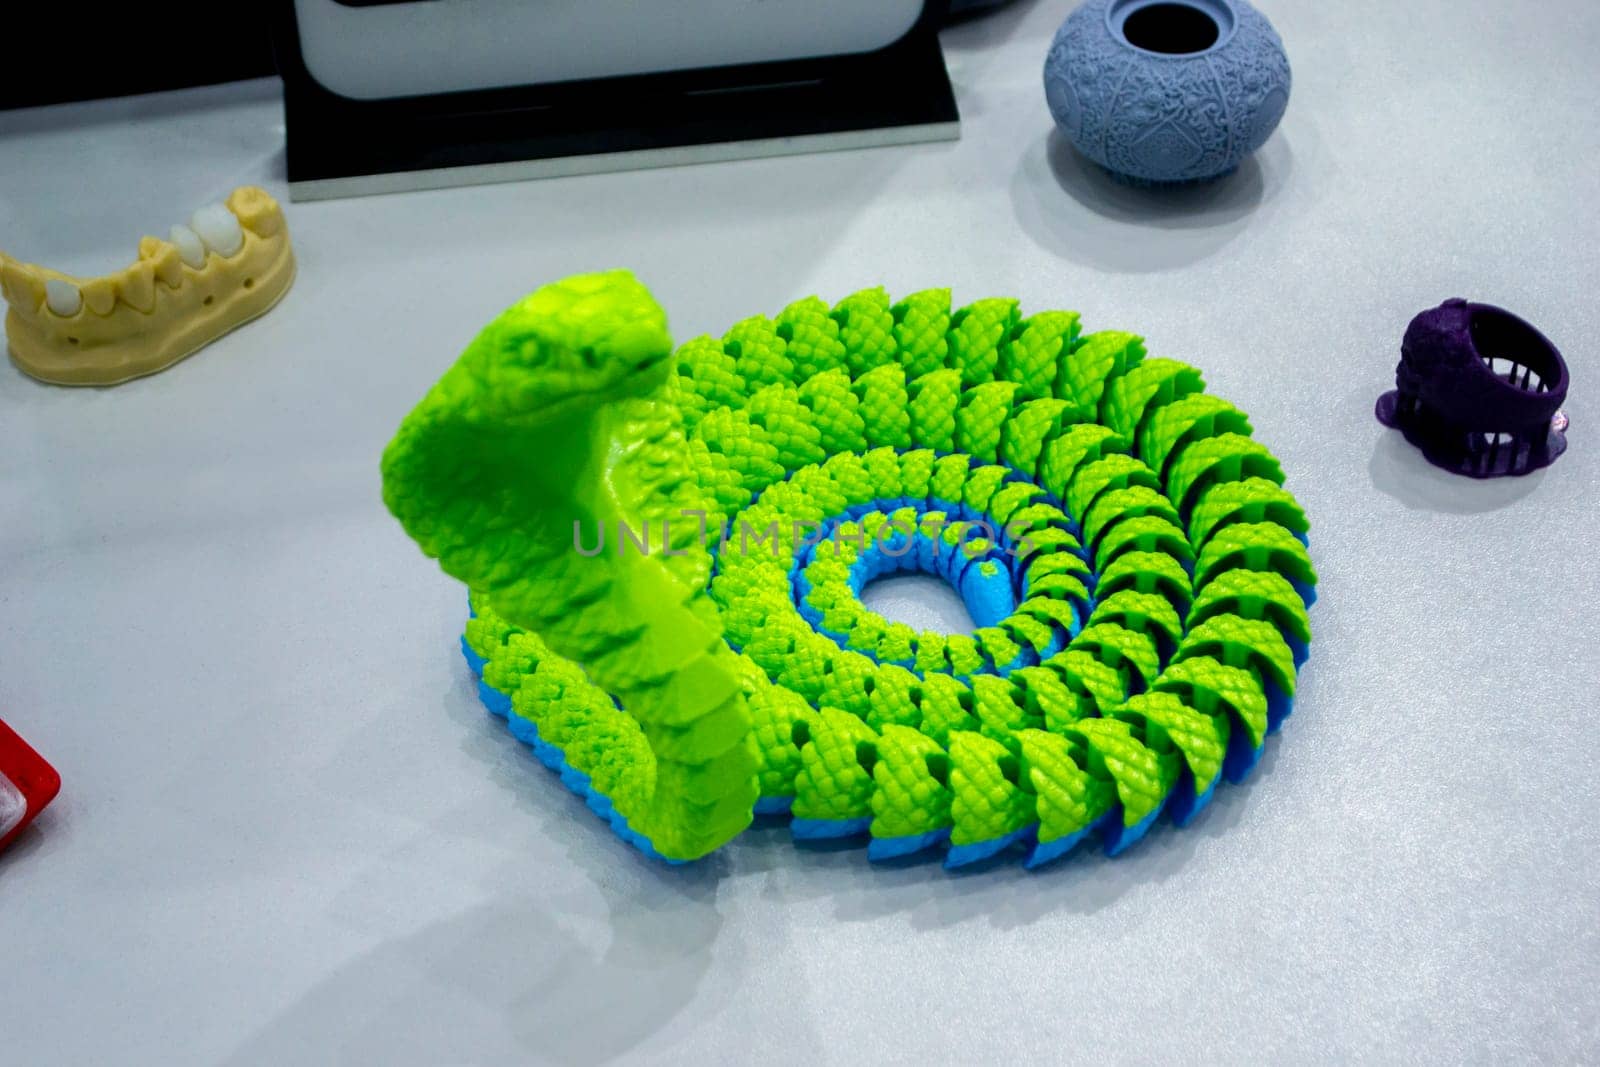 Green snake toy model printed 3D printer from melted plastic Snake-shaped object by Mari1408